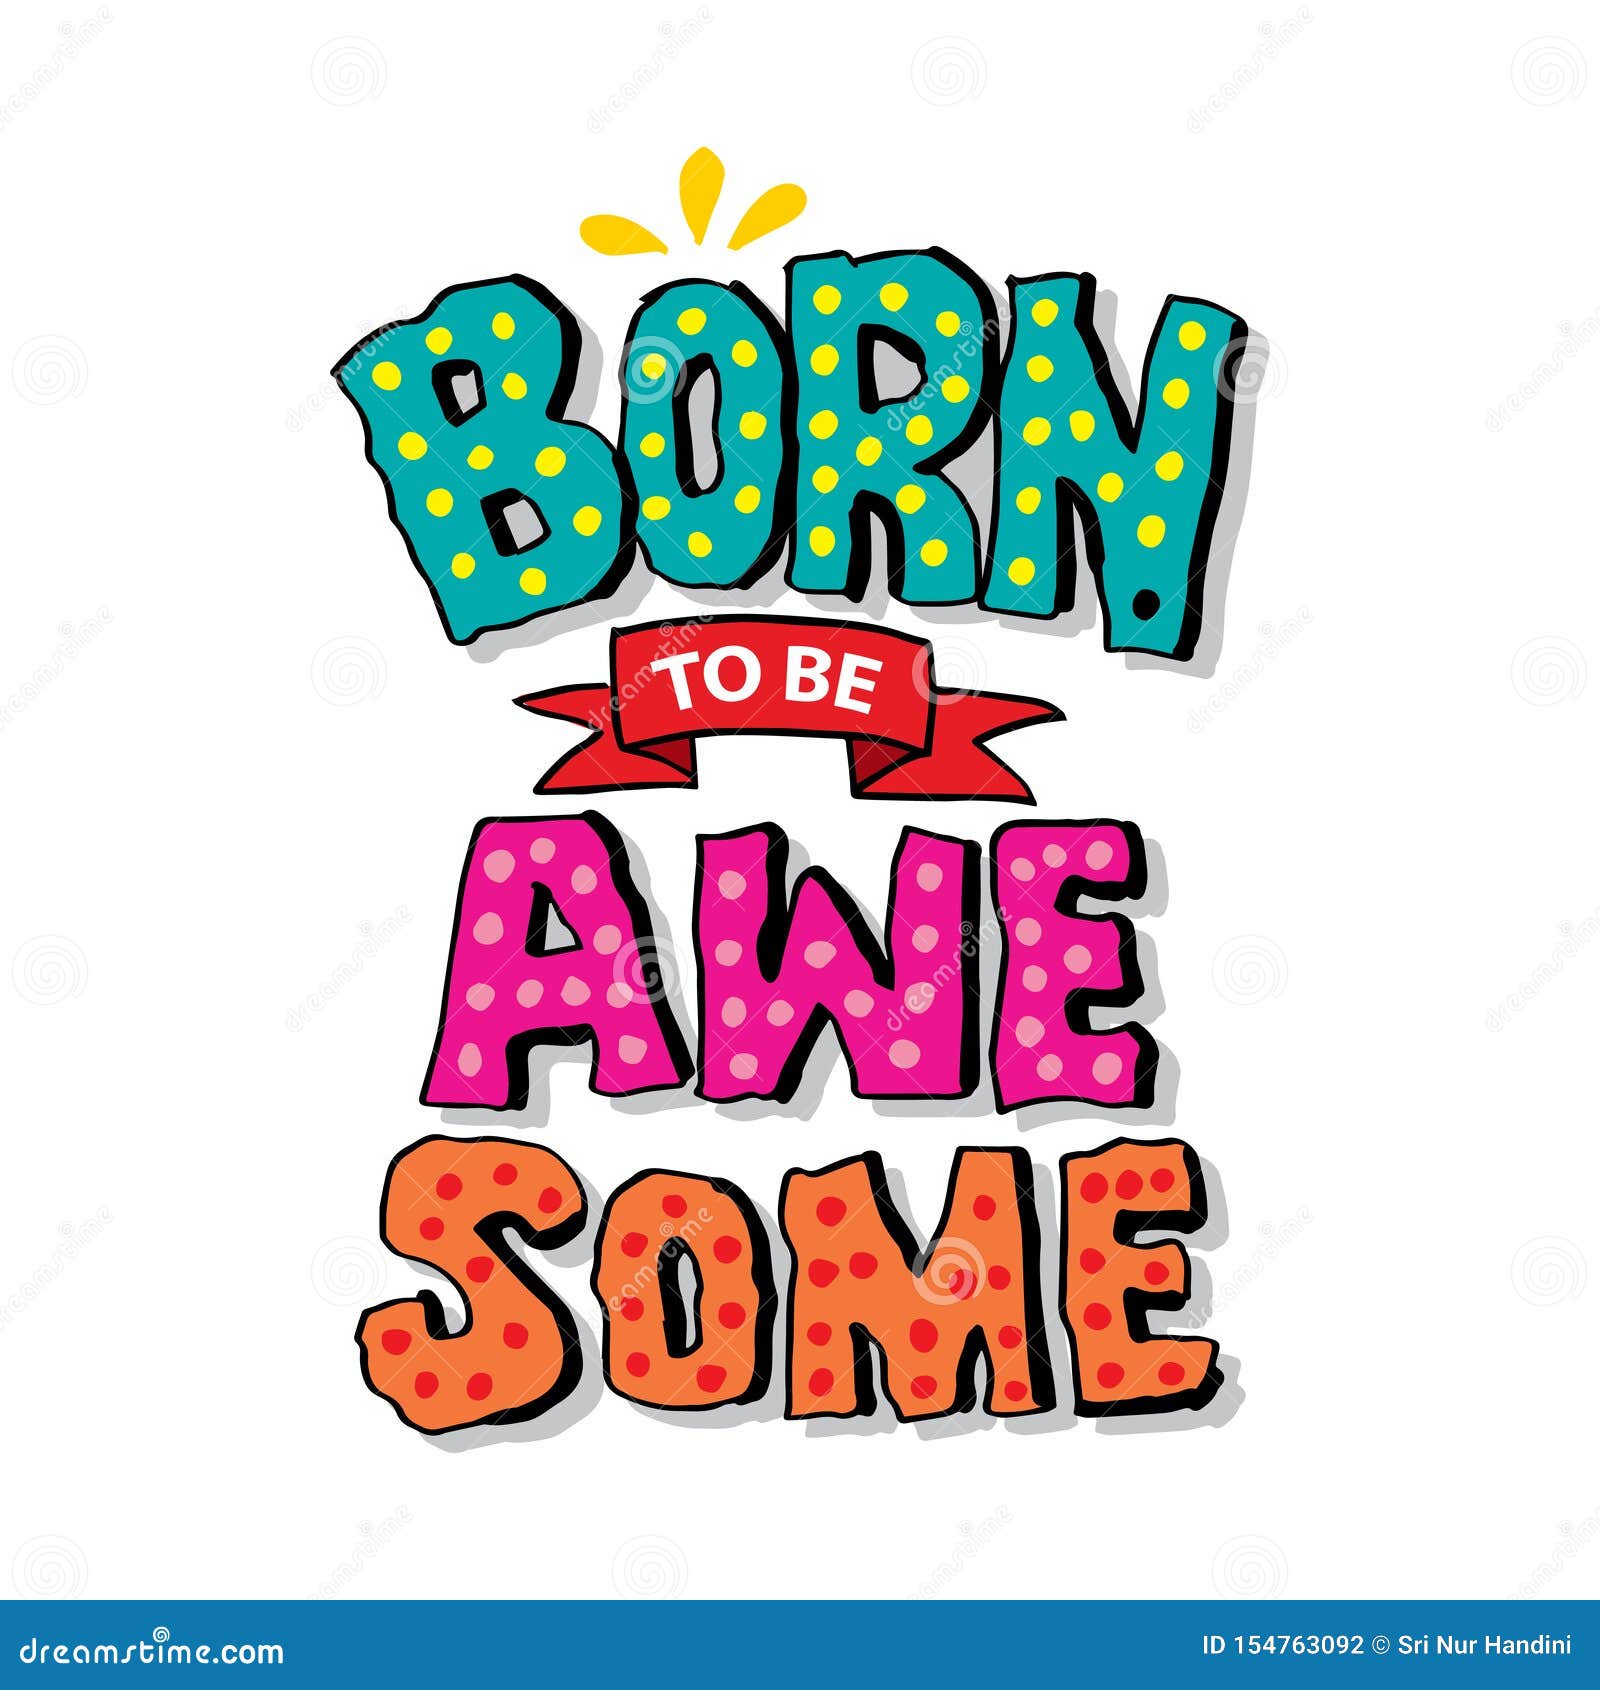 born to be awesome. motivational quote.